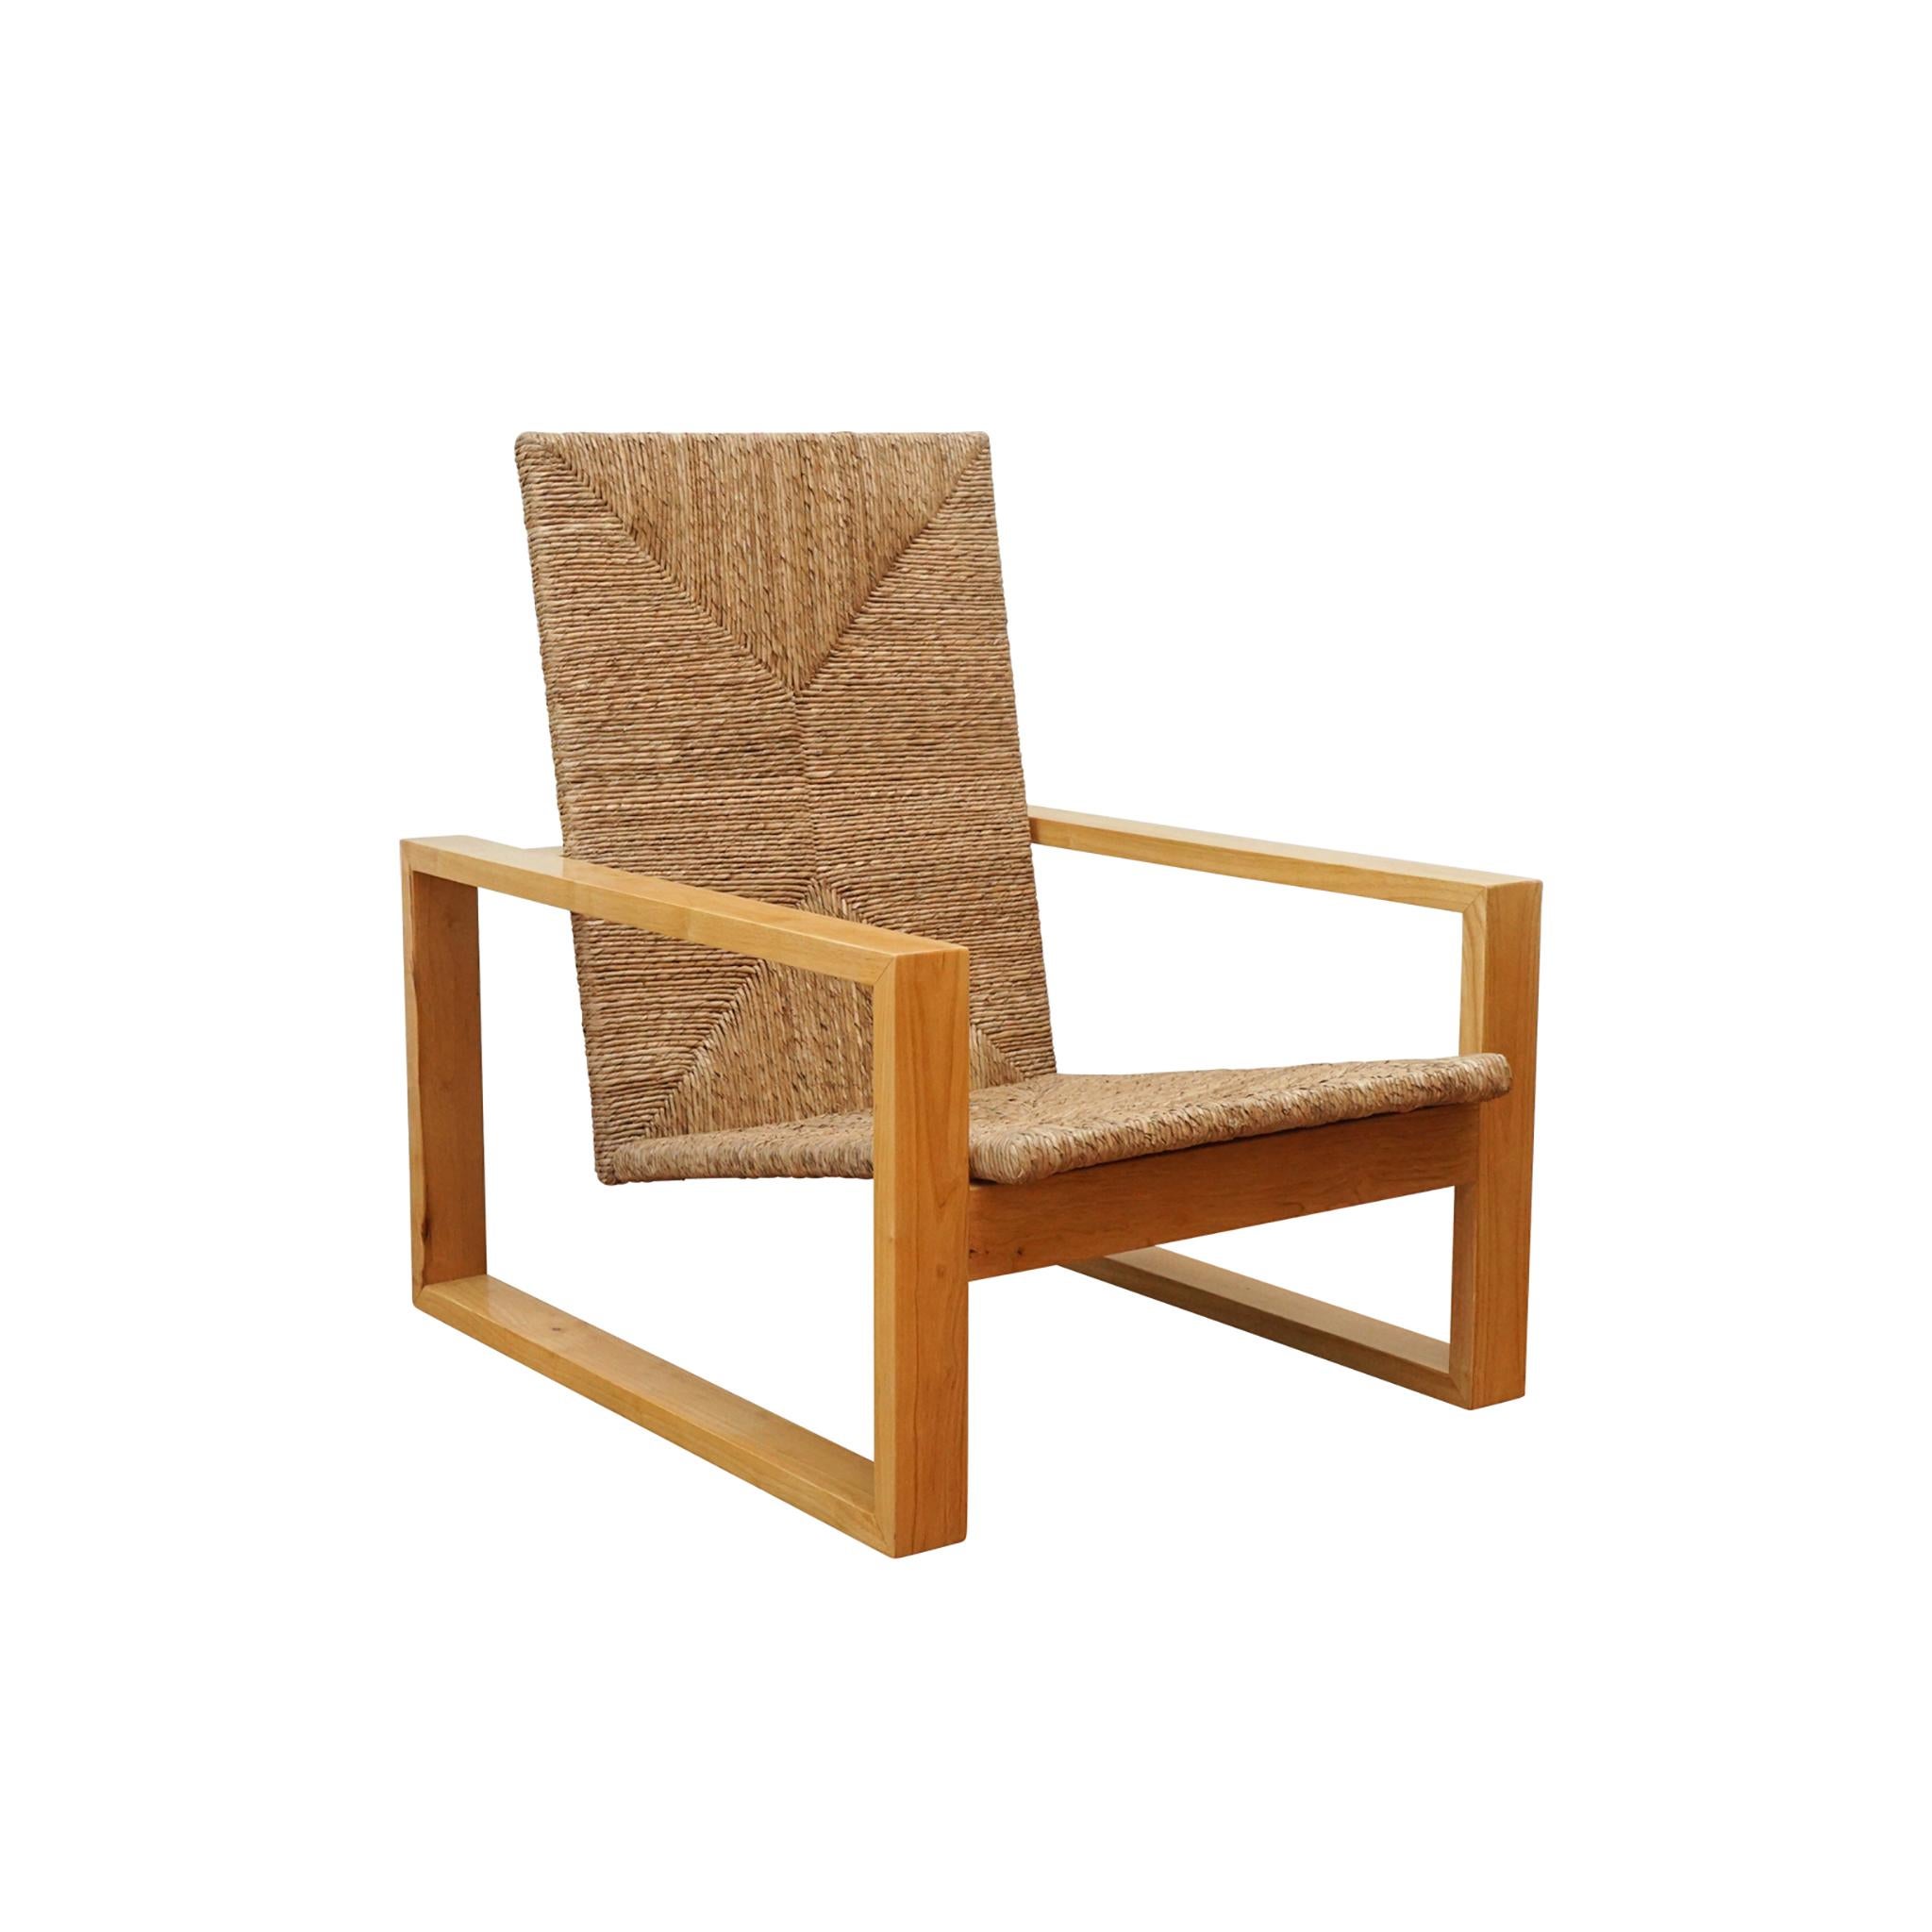 Modern open square armchair inspired by the Bauhaus Movement. Finishes available in blonde primavera wood with braided abaca or ebonized rosa morada wood with ebonized rattan. Cushions available in COM. 

COM: 2 yards

Measurements:
width: